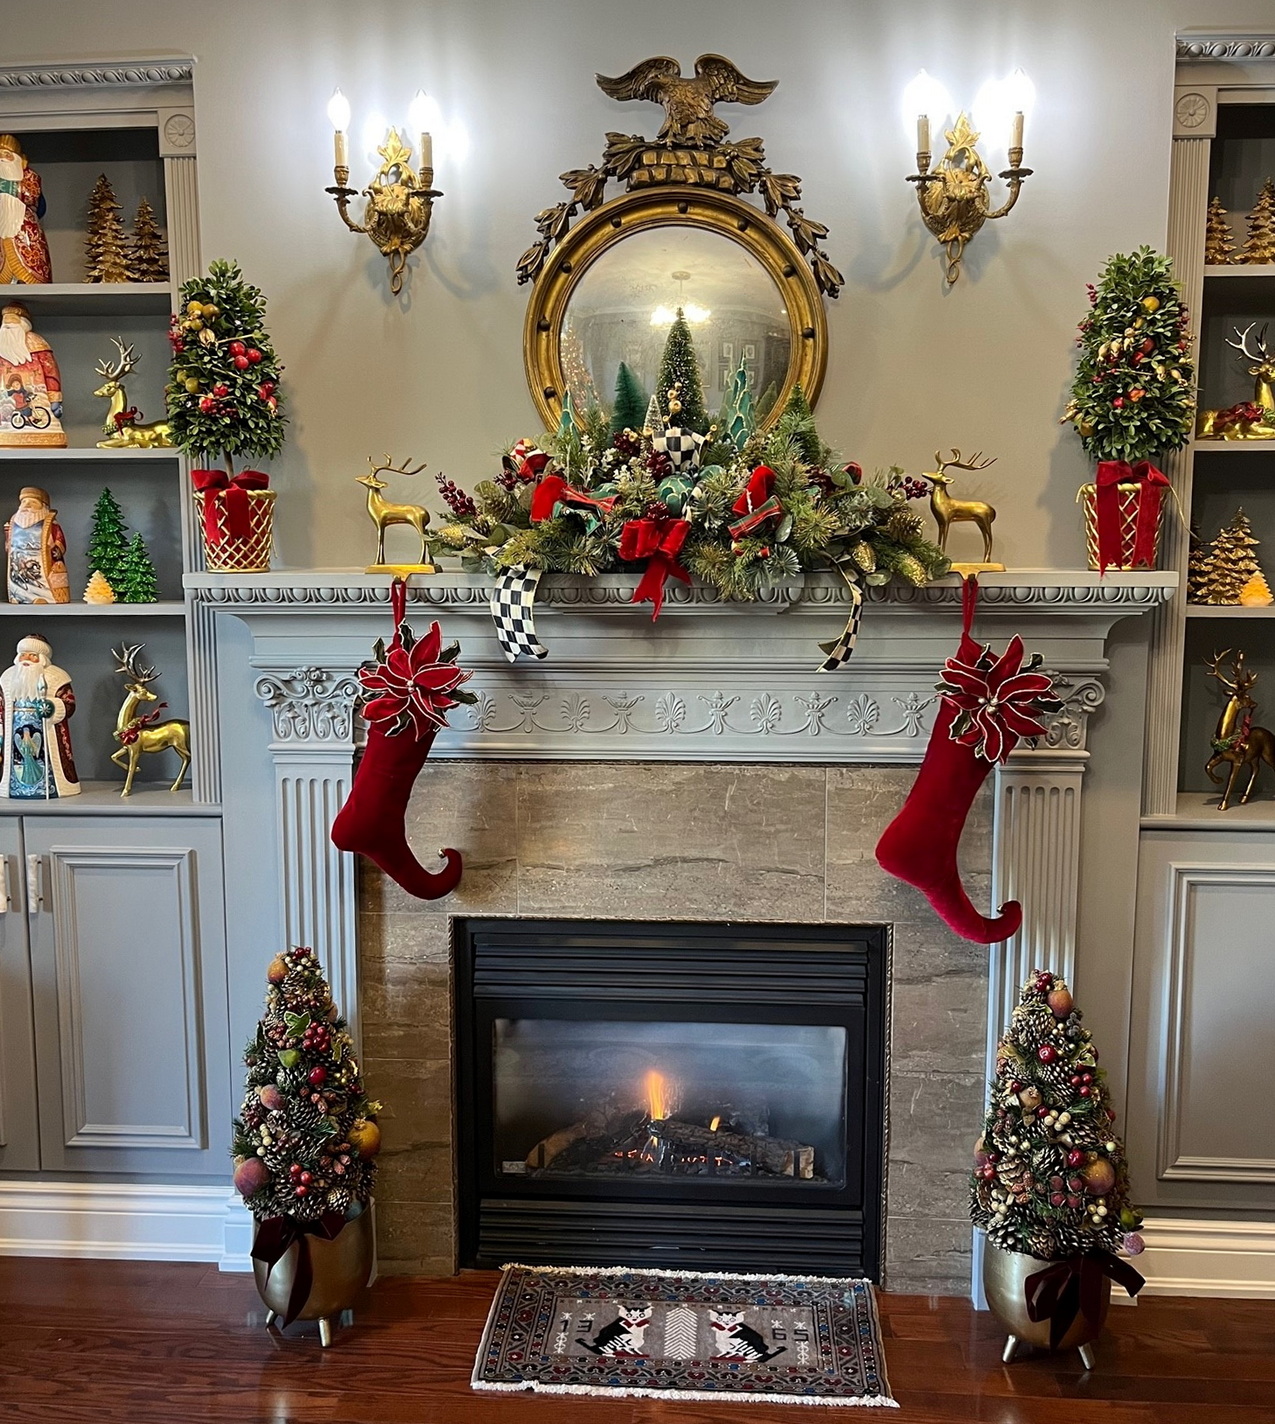 Homes for the Holidays 2022 fireplace stockings